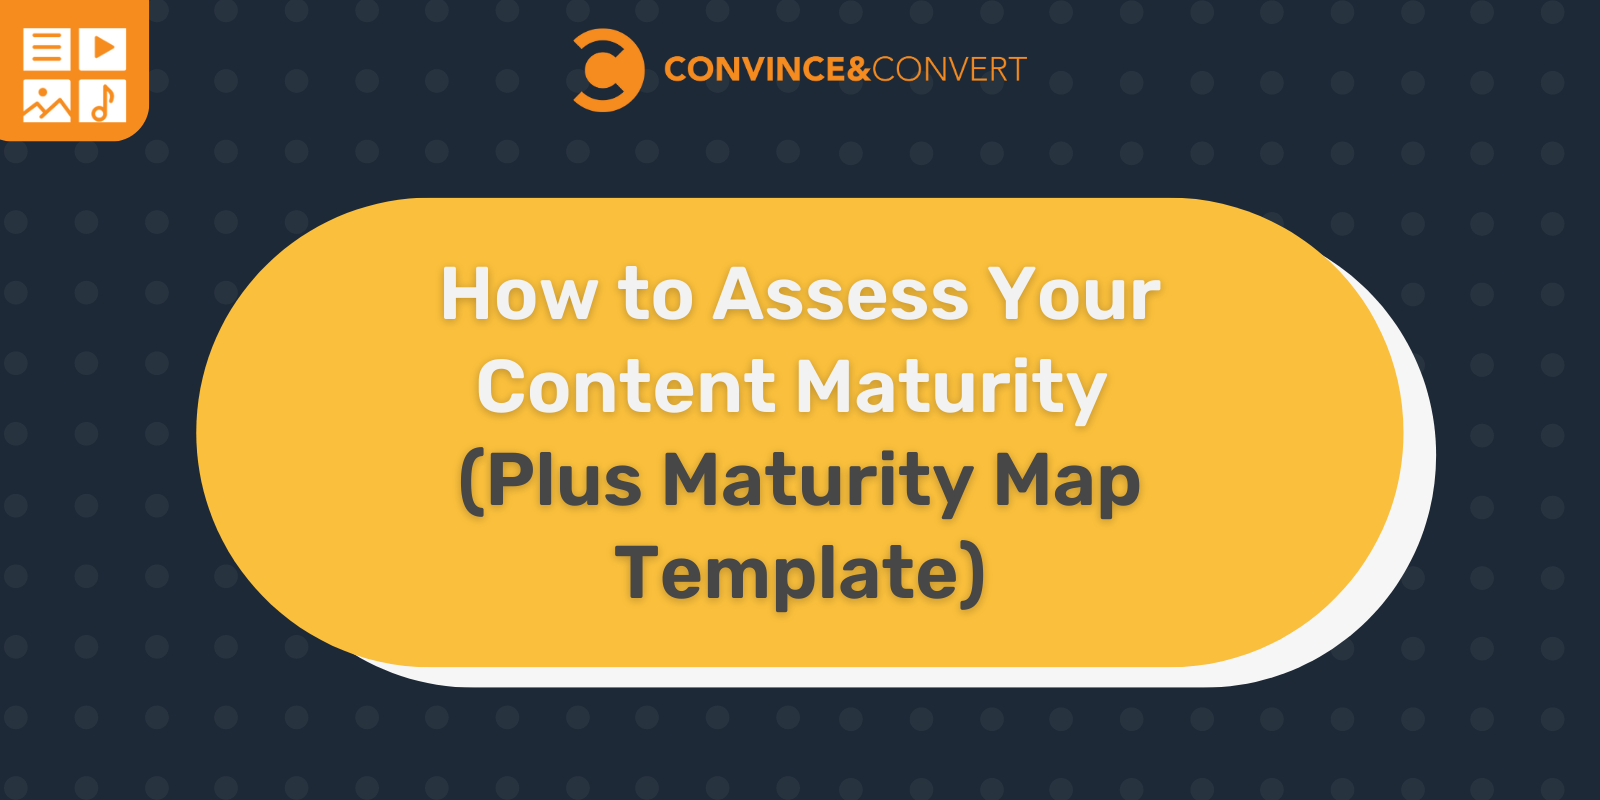 How to Assess Your Content Maturity (Plus Maturity Map Template)